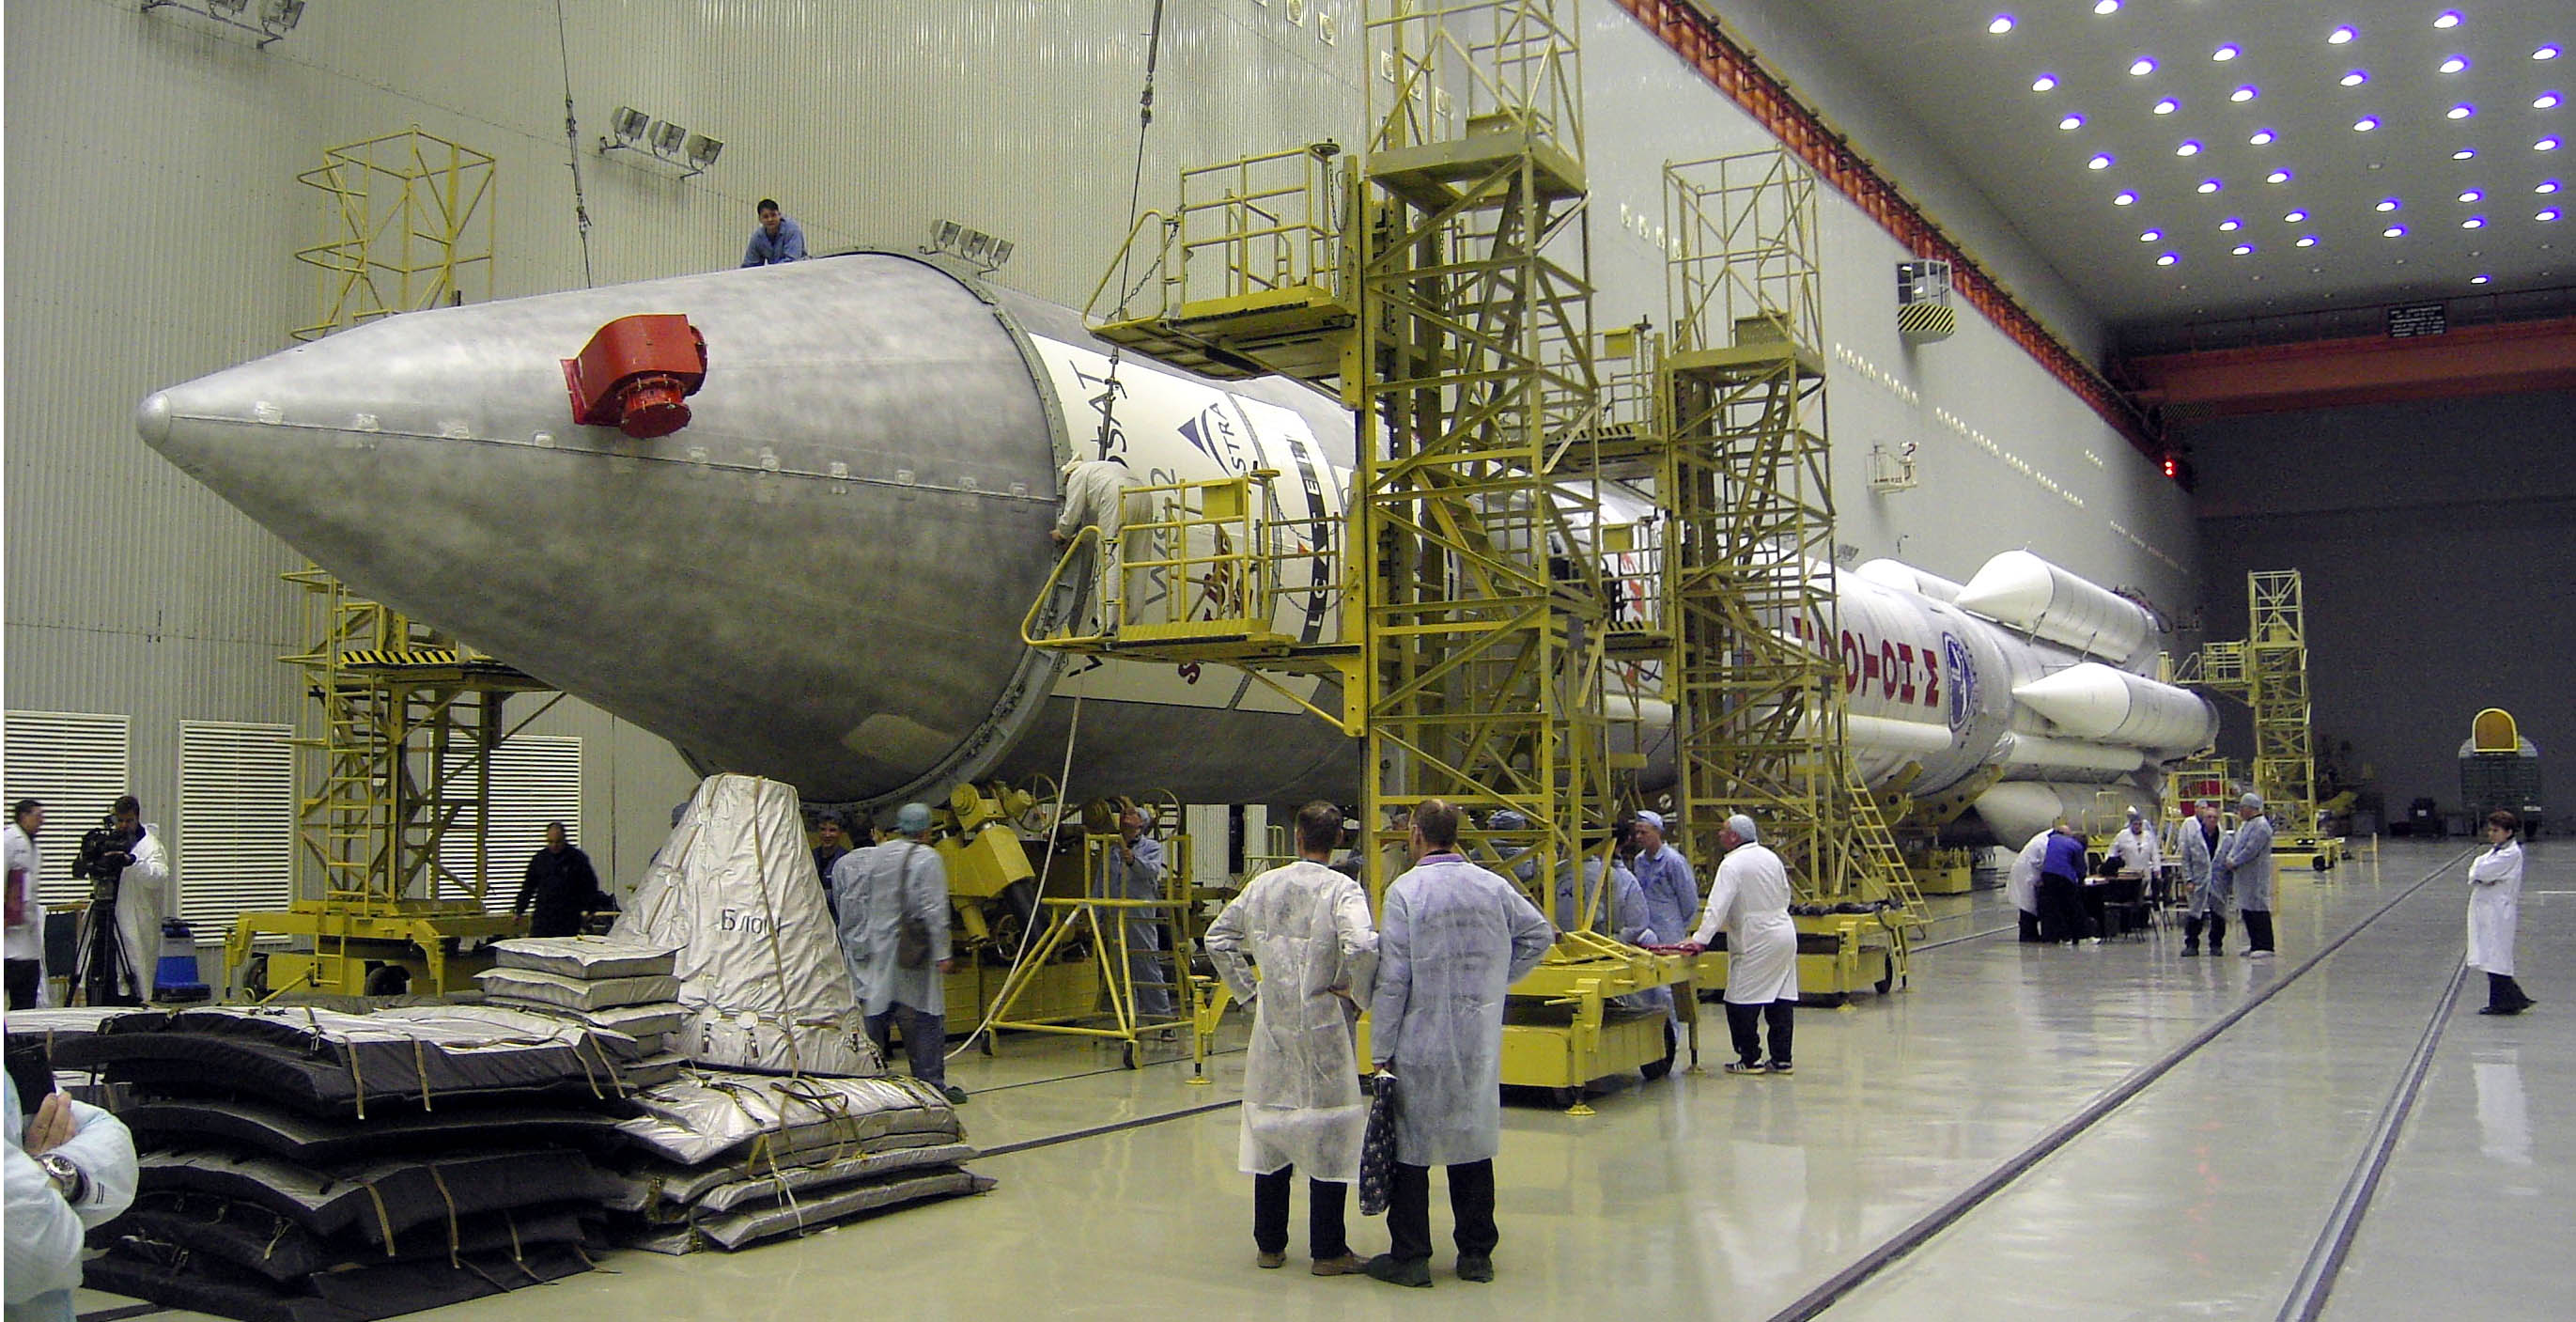 Proton-M Being Readied for Rollout, January 2005